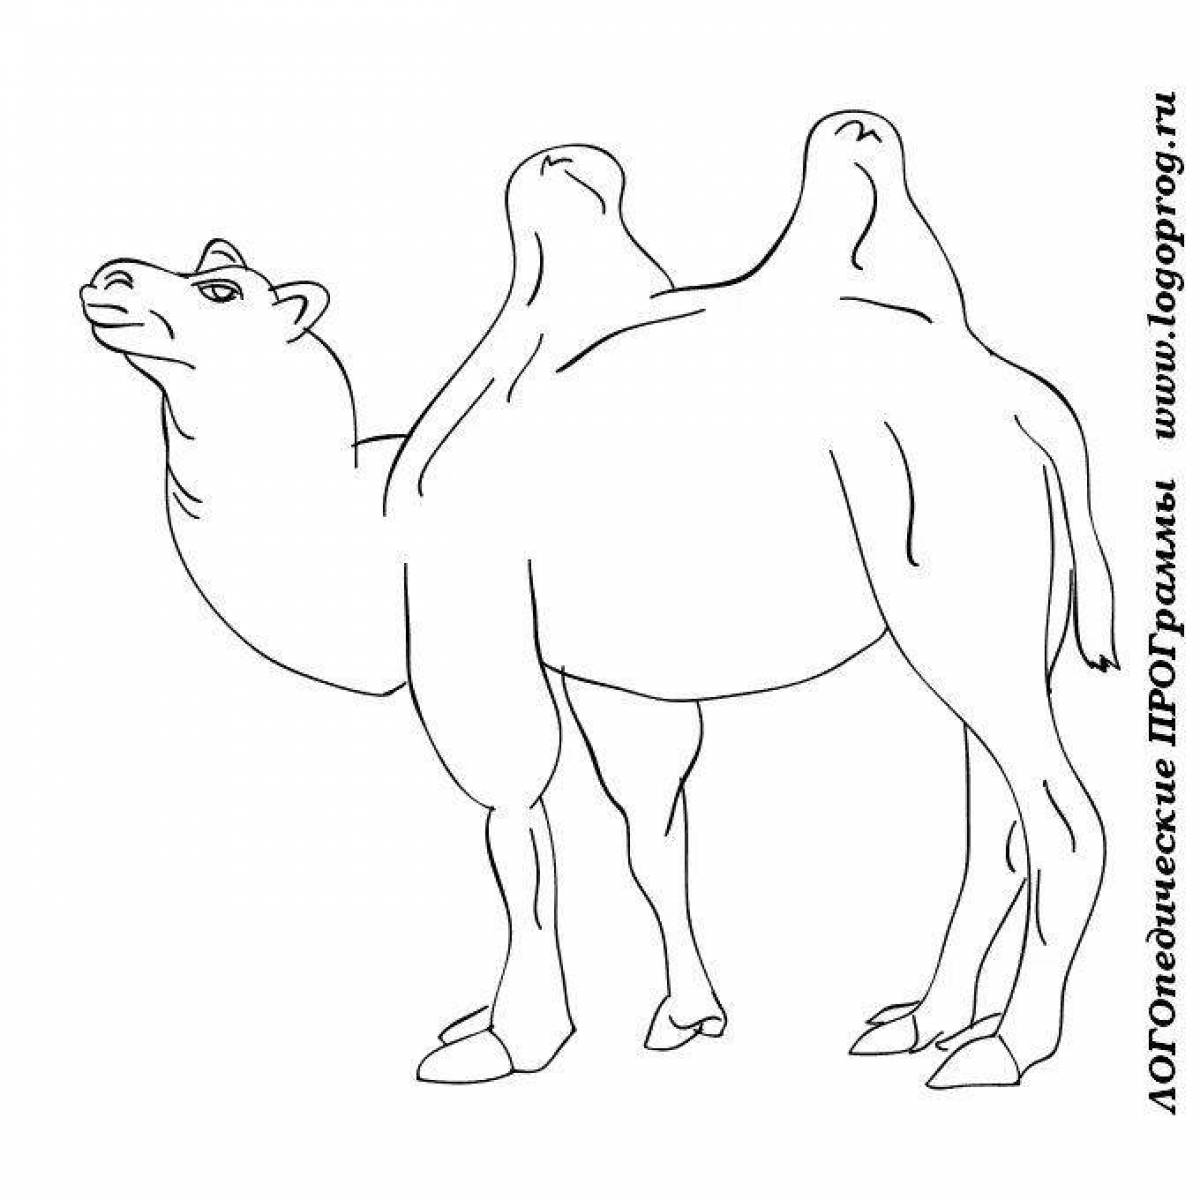 Incredible coloring book for kids with animals from hot countries